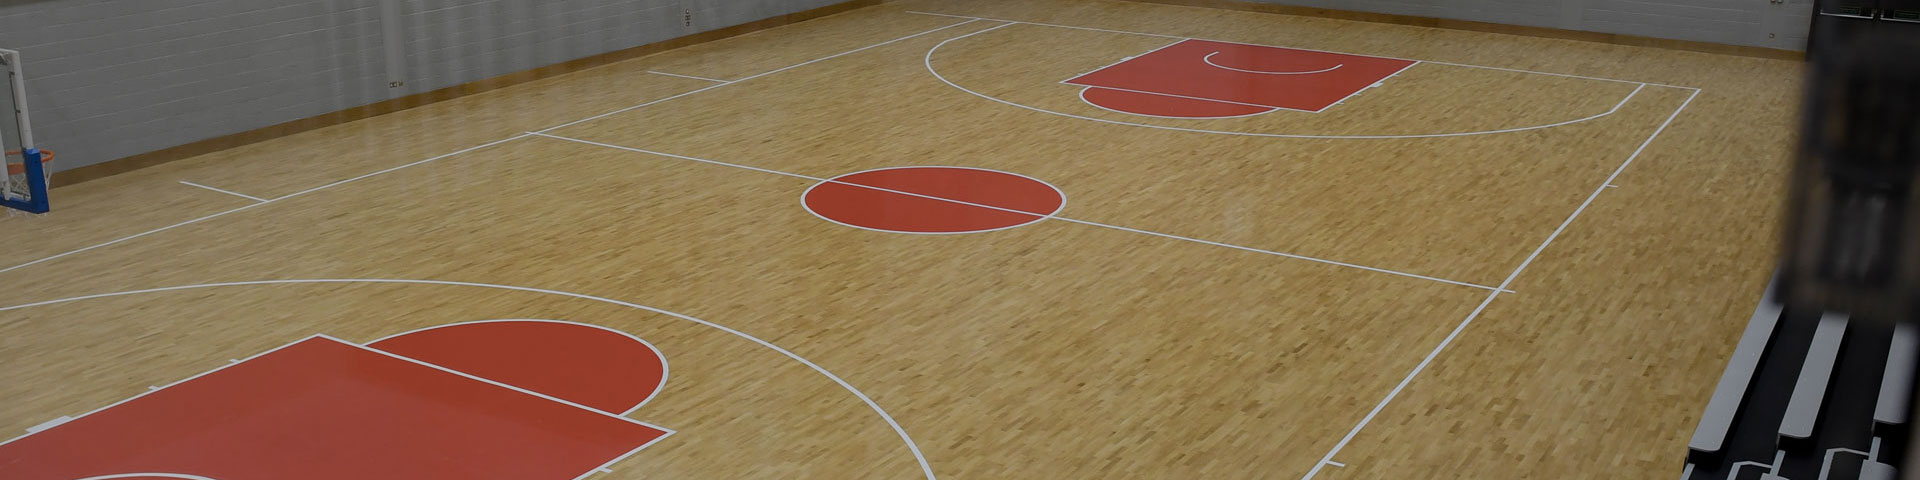 Basketball court at the Solent Sports Complex